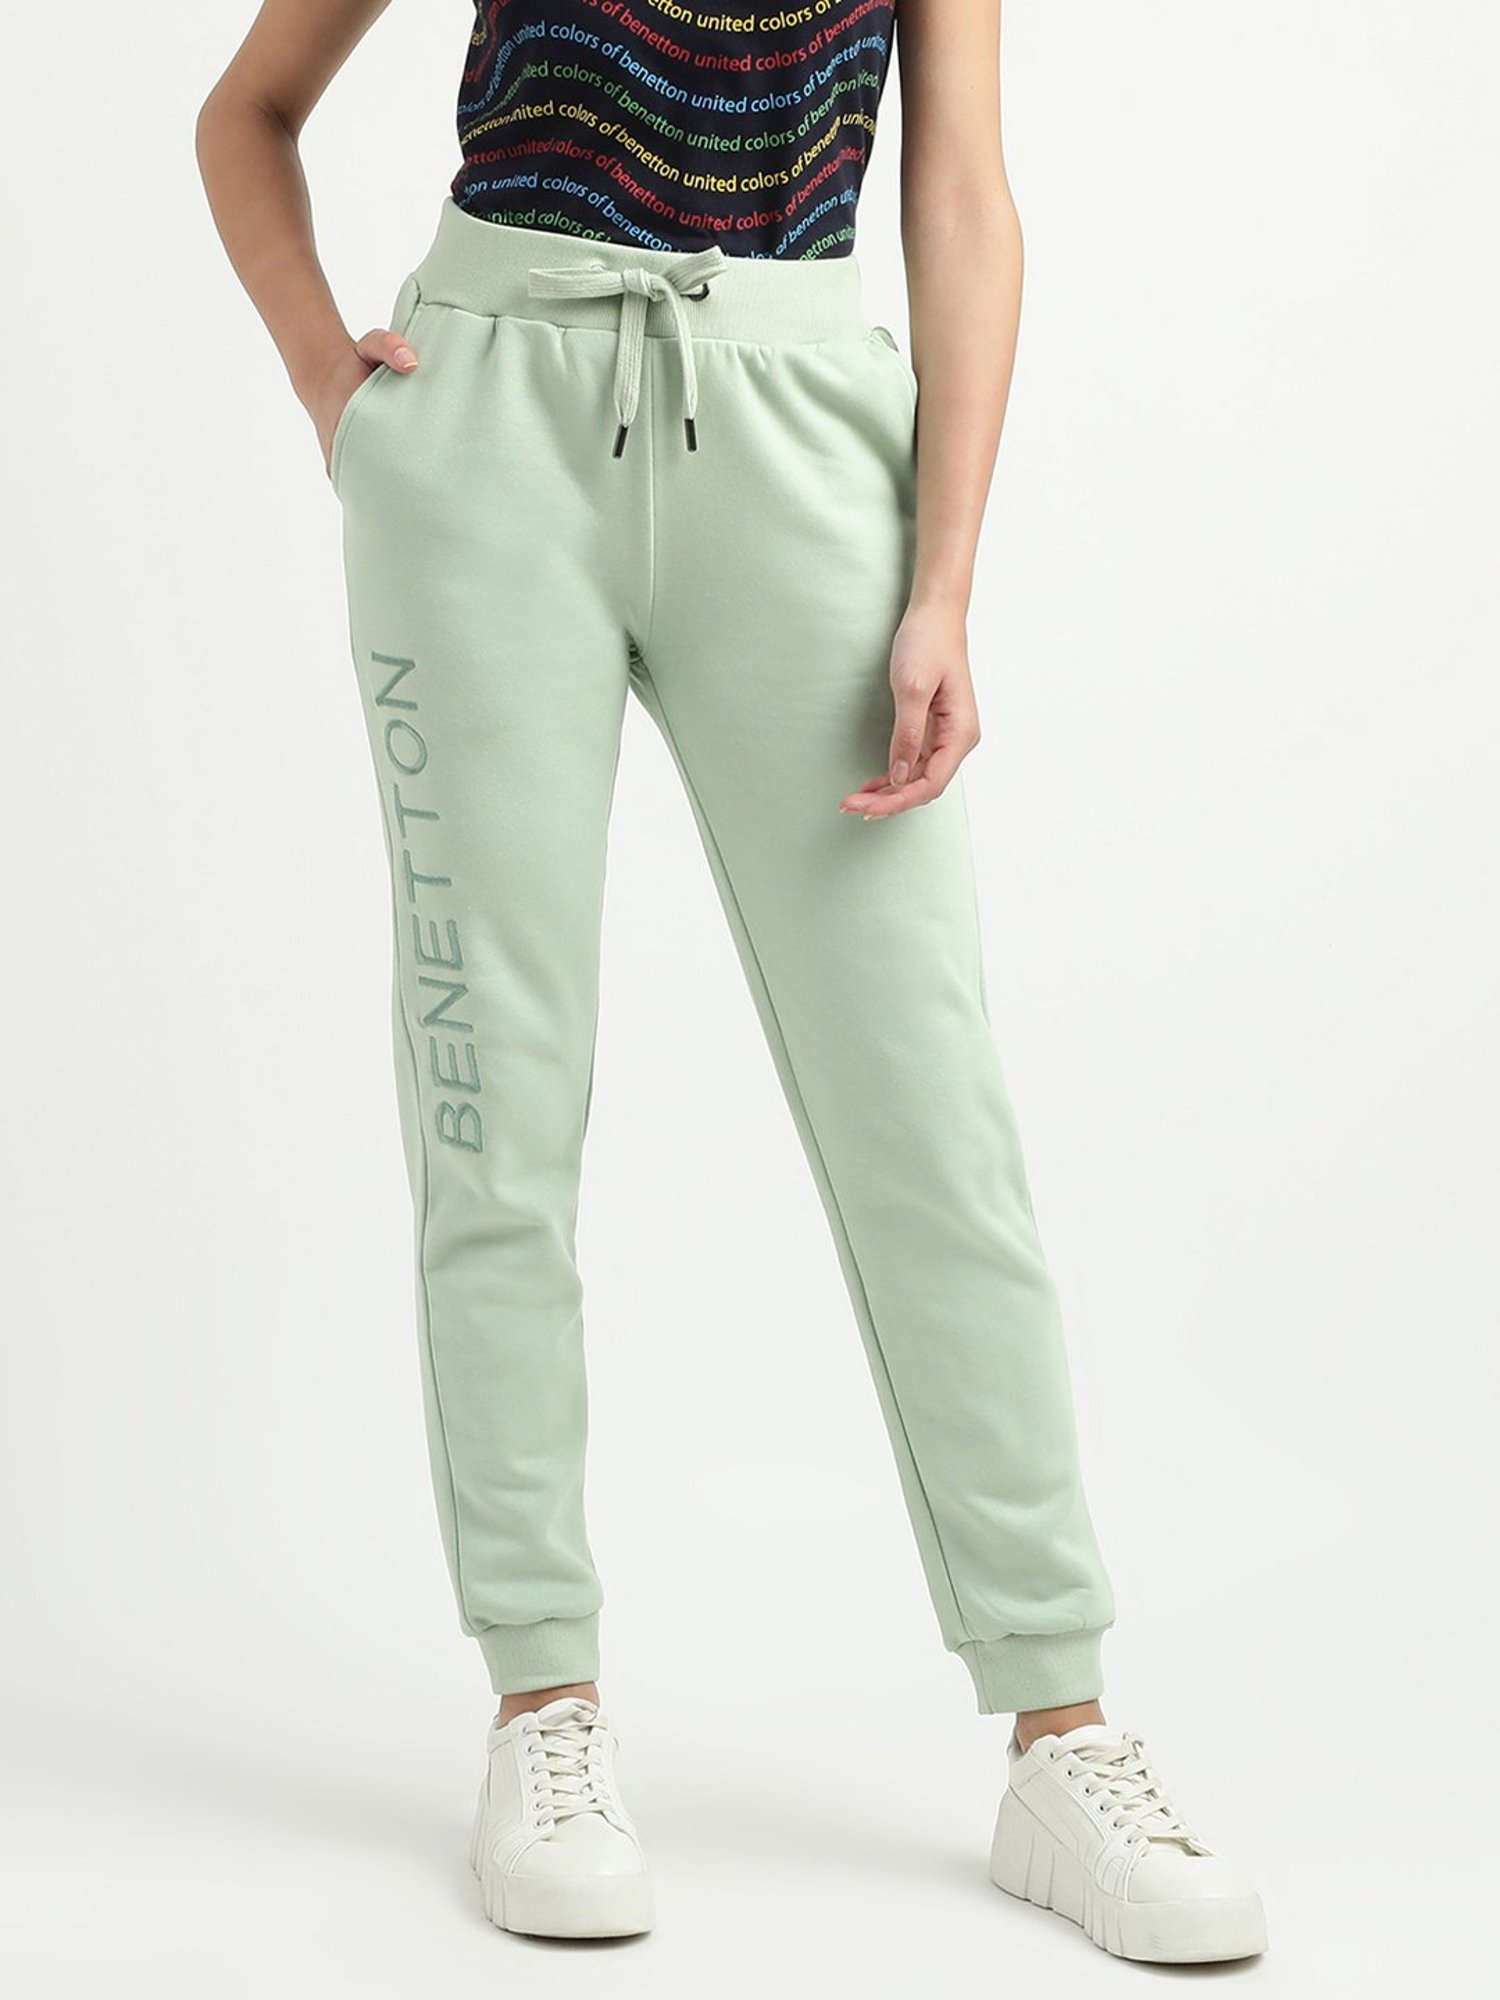 Buy UNITED COLORS OF BENETTON Boys Check Trousers  Shoppers Stop